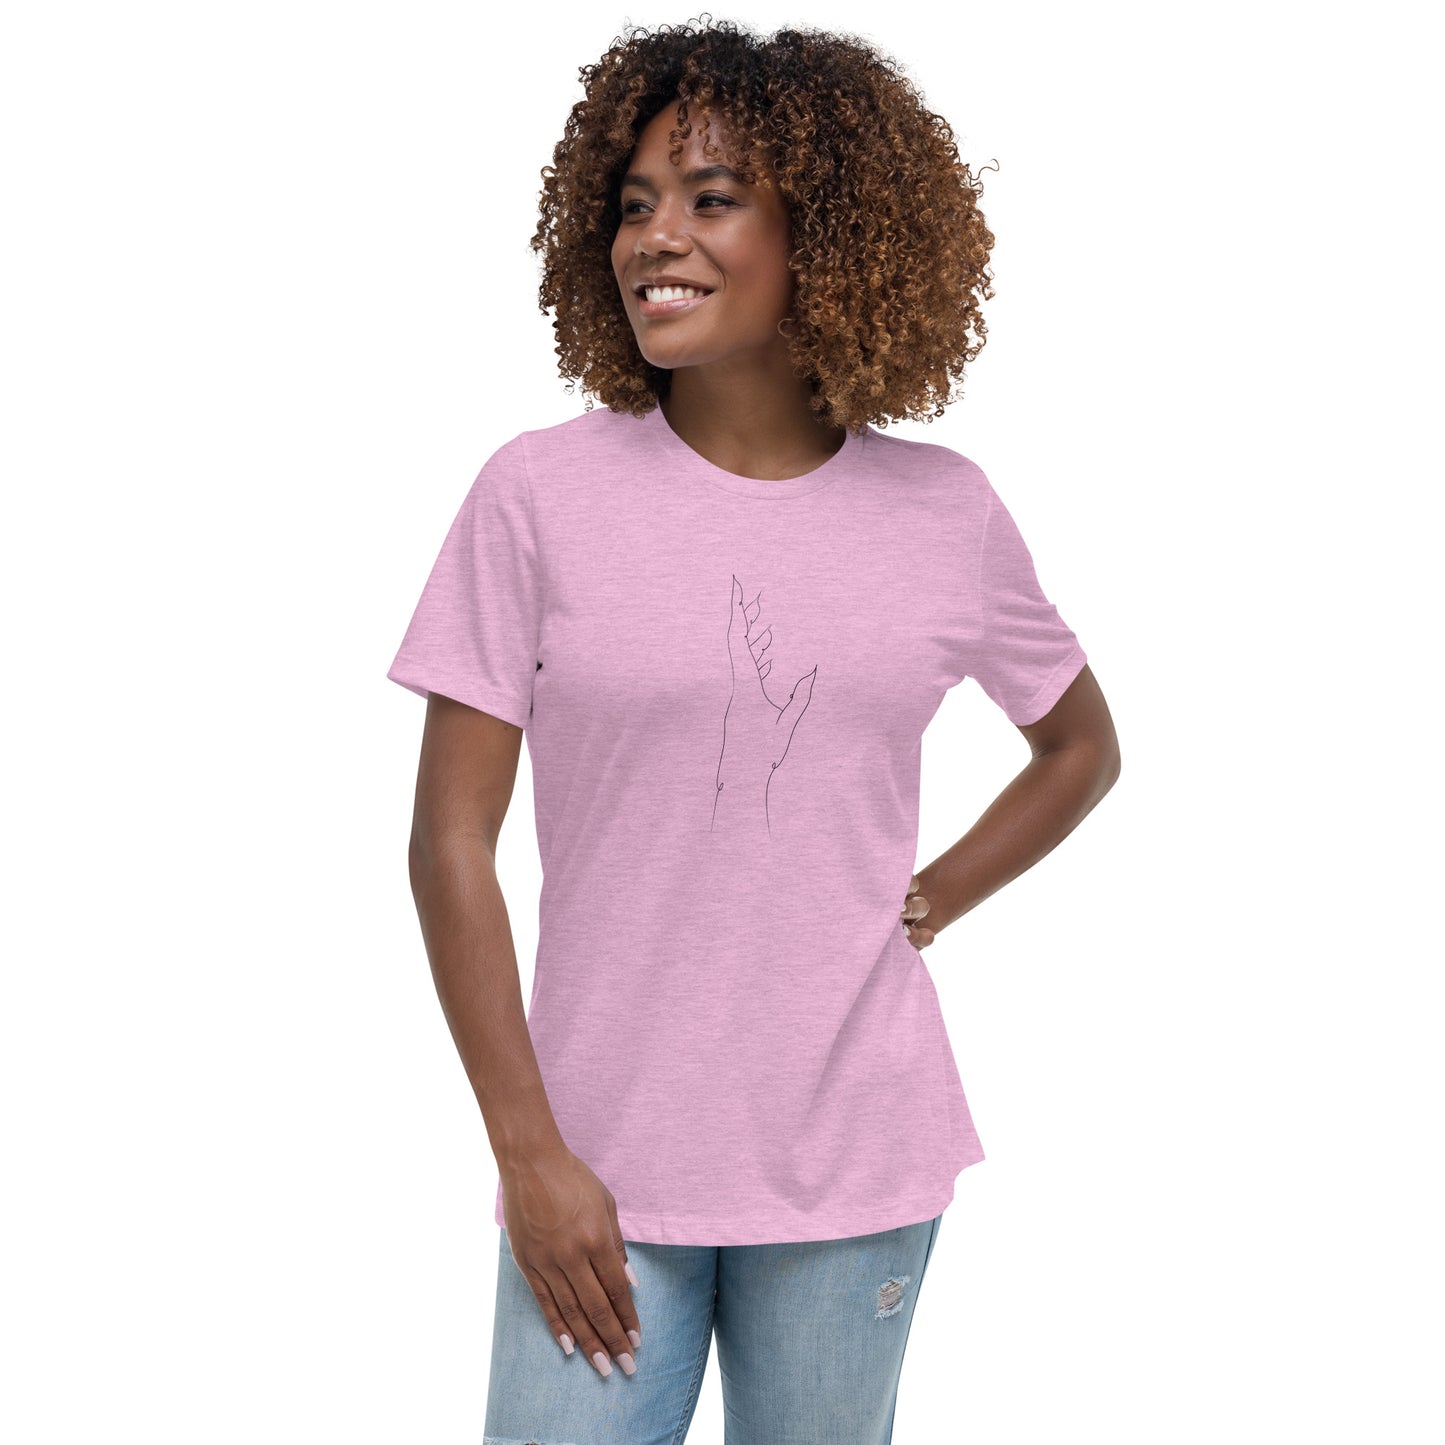 Hold On Relaxed T-Shirt